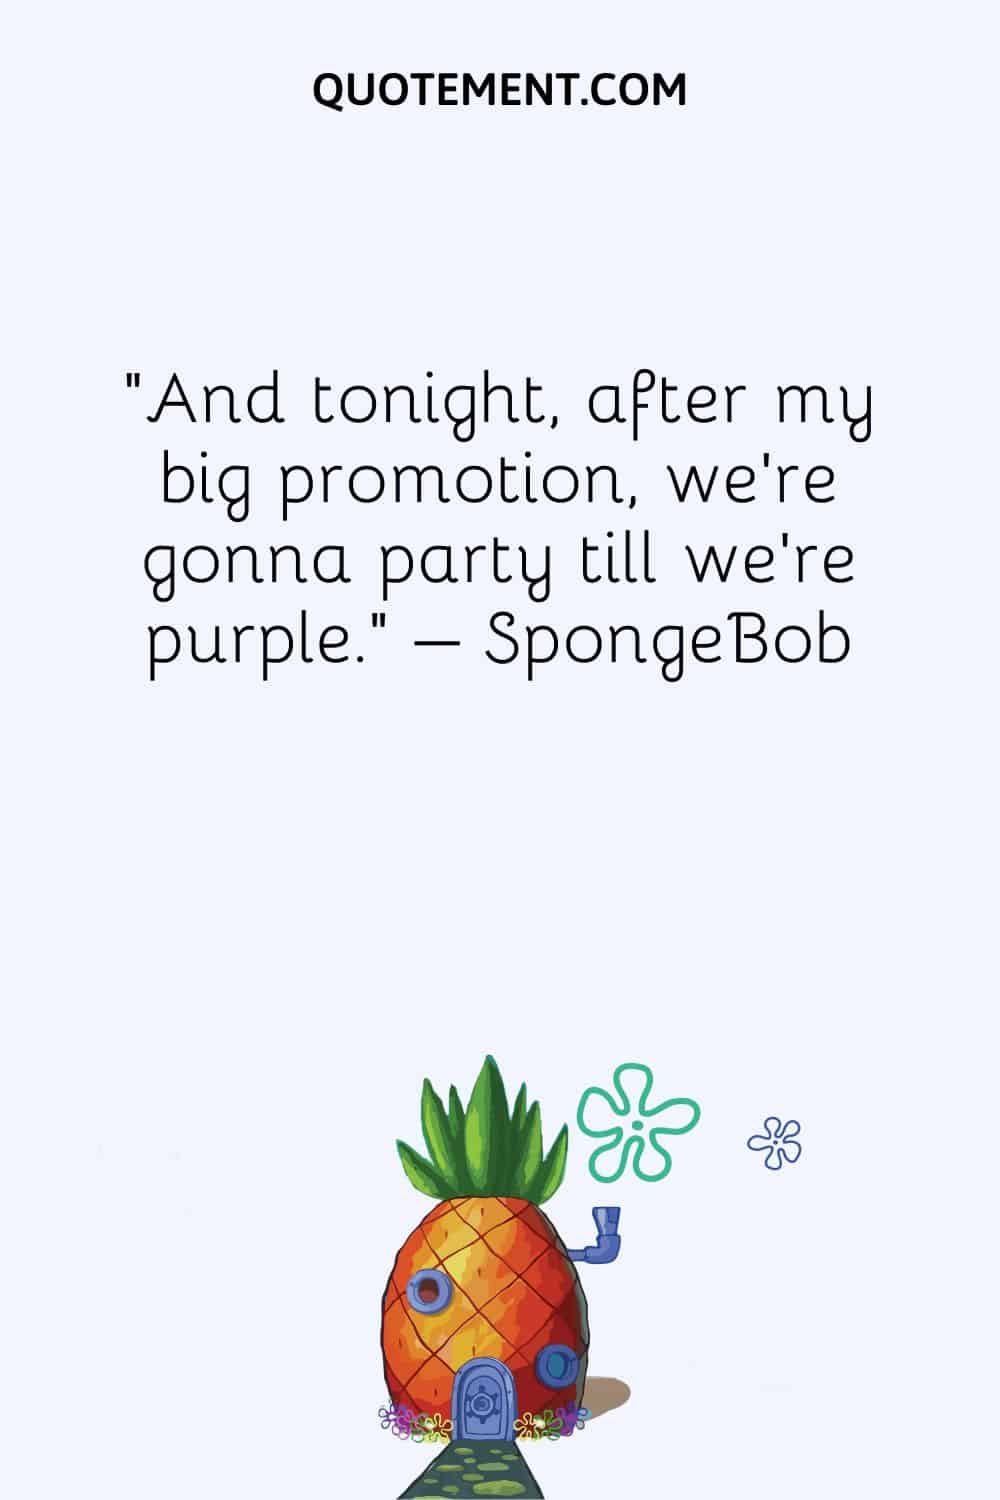 “And tonight, after my big promotion, we’re gonna party till we’re purple.” – SpongeBob